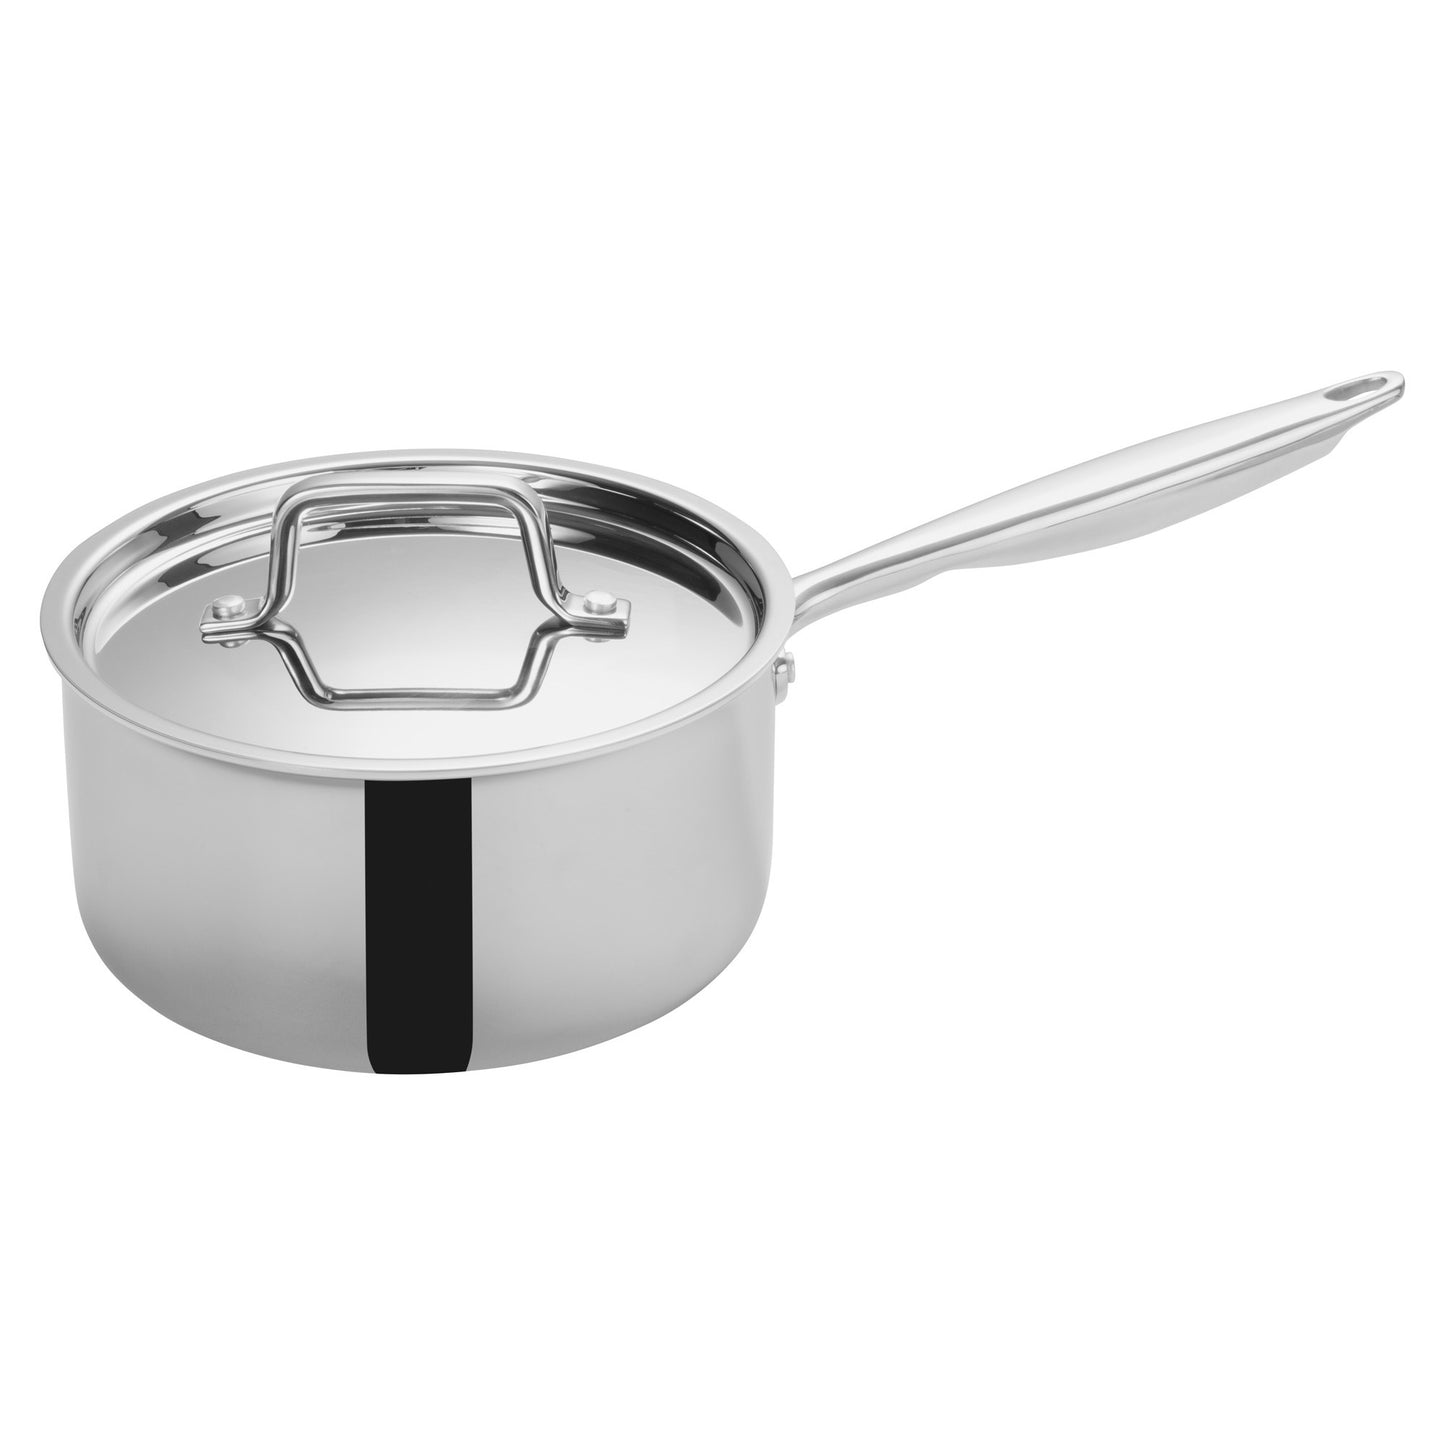 TGAP-4 - Tri-Gen Tri-Ply Stainless Steel Sauce Pan with Cover - 3-1/2 Quart